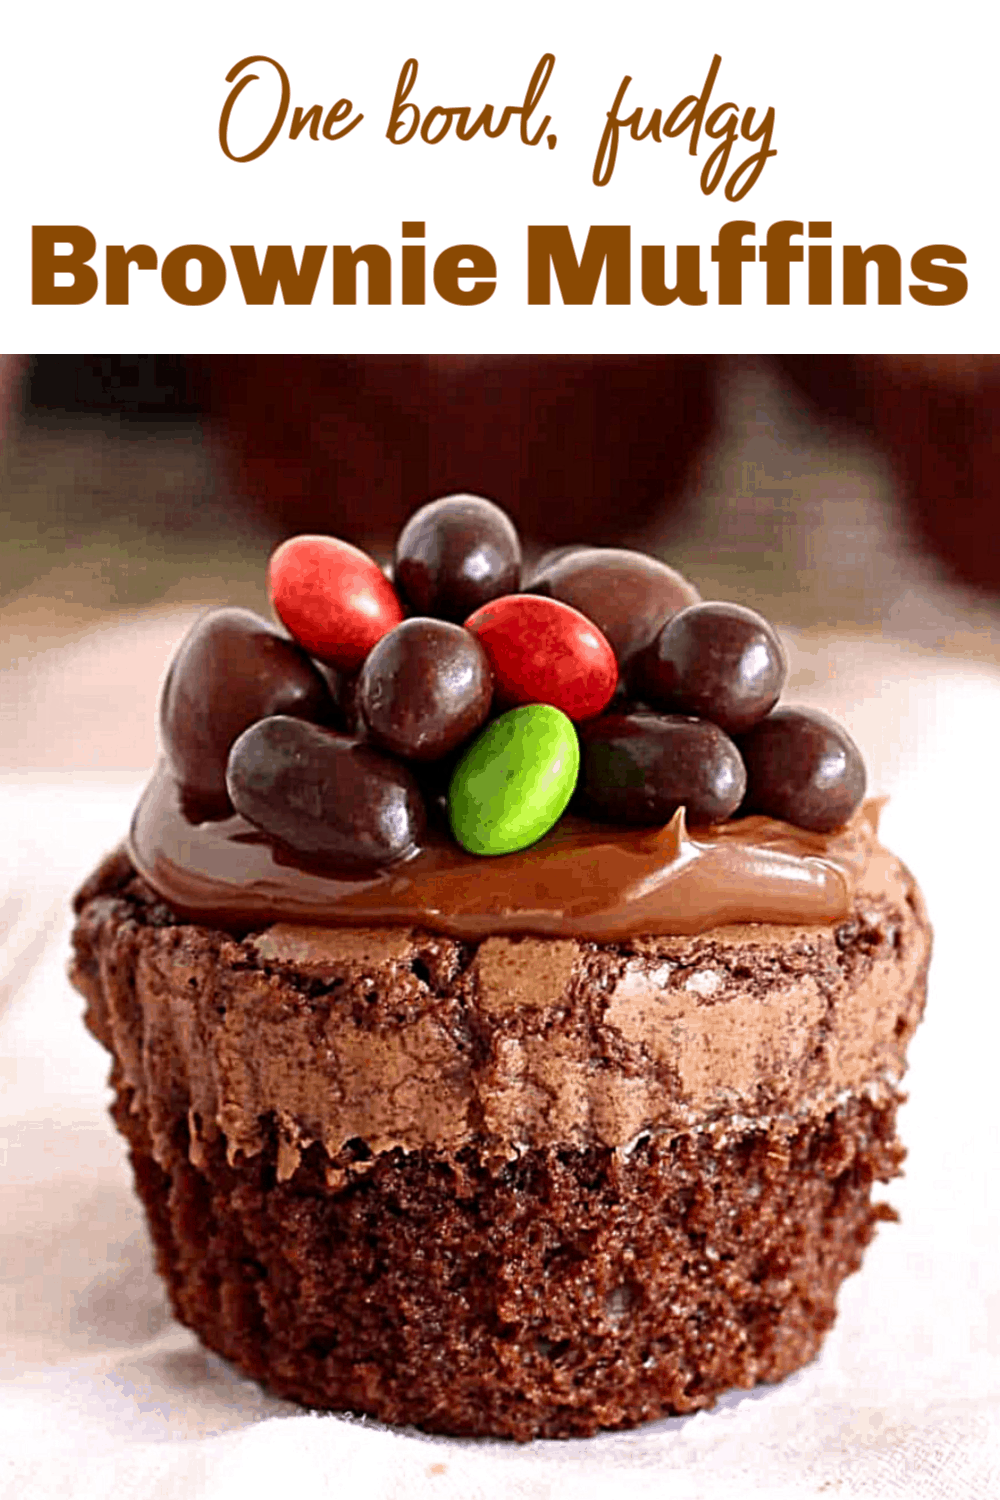 Fudgy Brownie Muffins (with video!) - Vintage Kitchen Notes